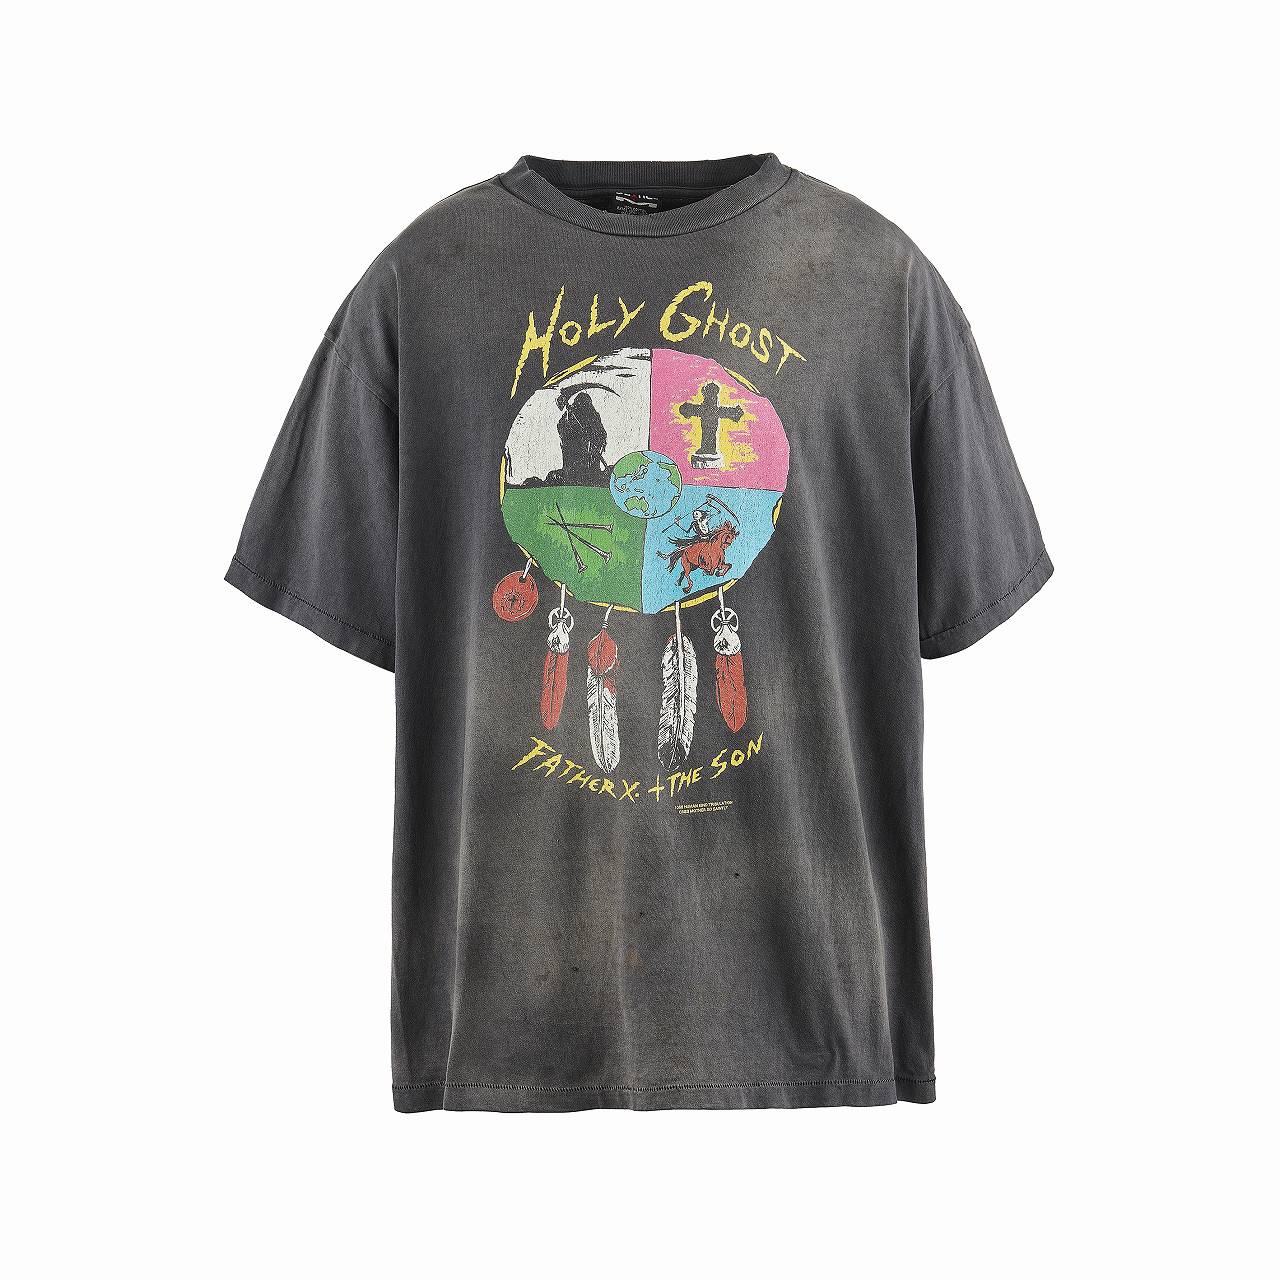 Saint Mxxxxxx (セントマイケル) 】LM-SS TEE / HOLY GHOST LASTMAN(ラストマン)  (SM-YS8-0000-C43) | Saint Mxxxxxx / カットソー (MEN) | Saint Mxxxxxx正規取扱店DIVERSE